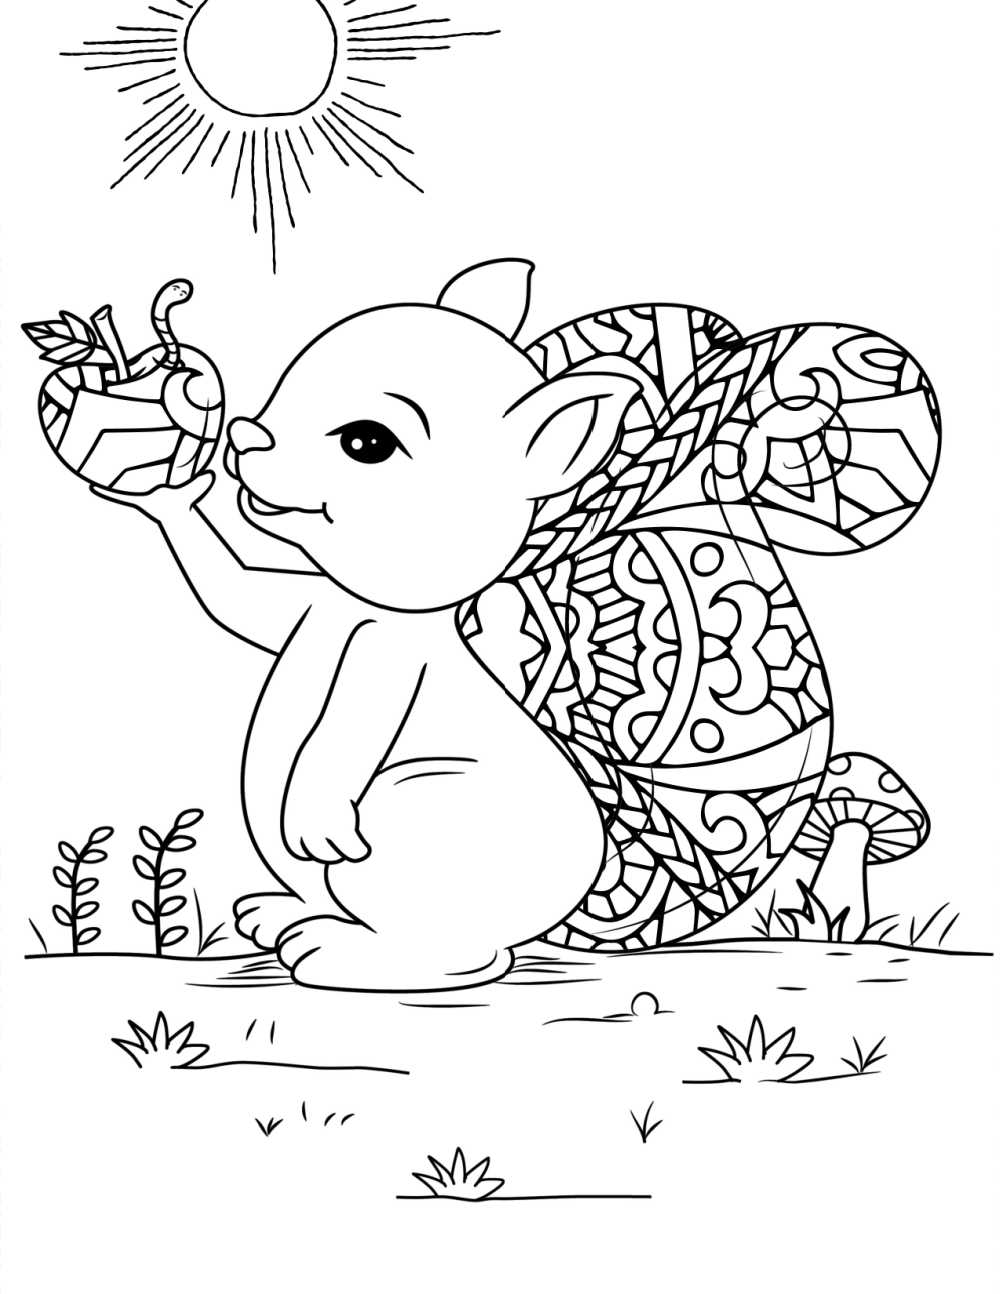 printable squirrel with an apple coloring page.